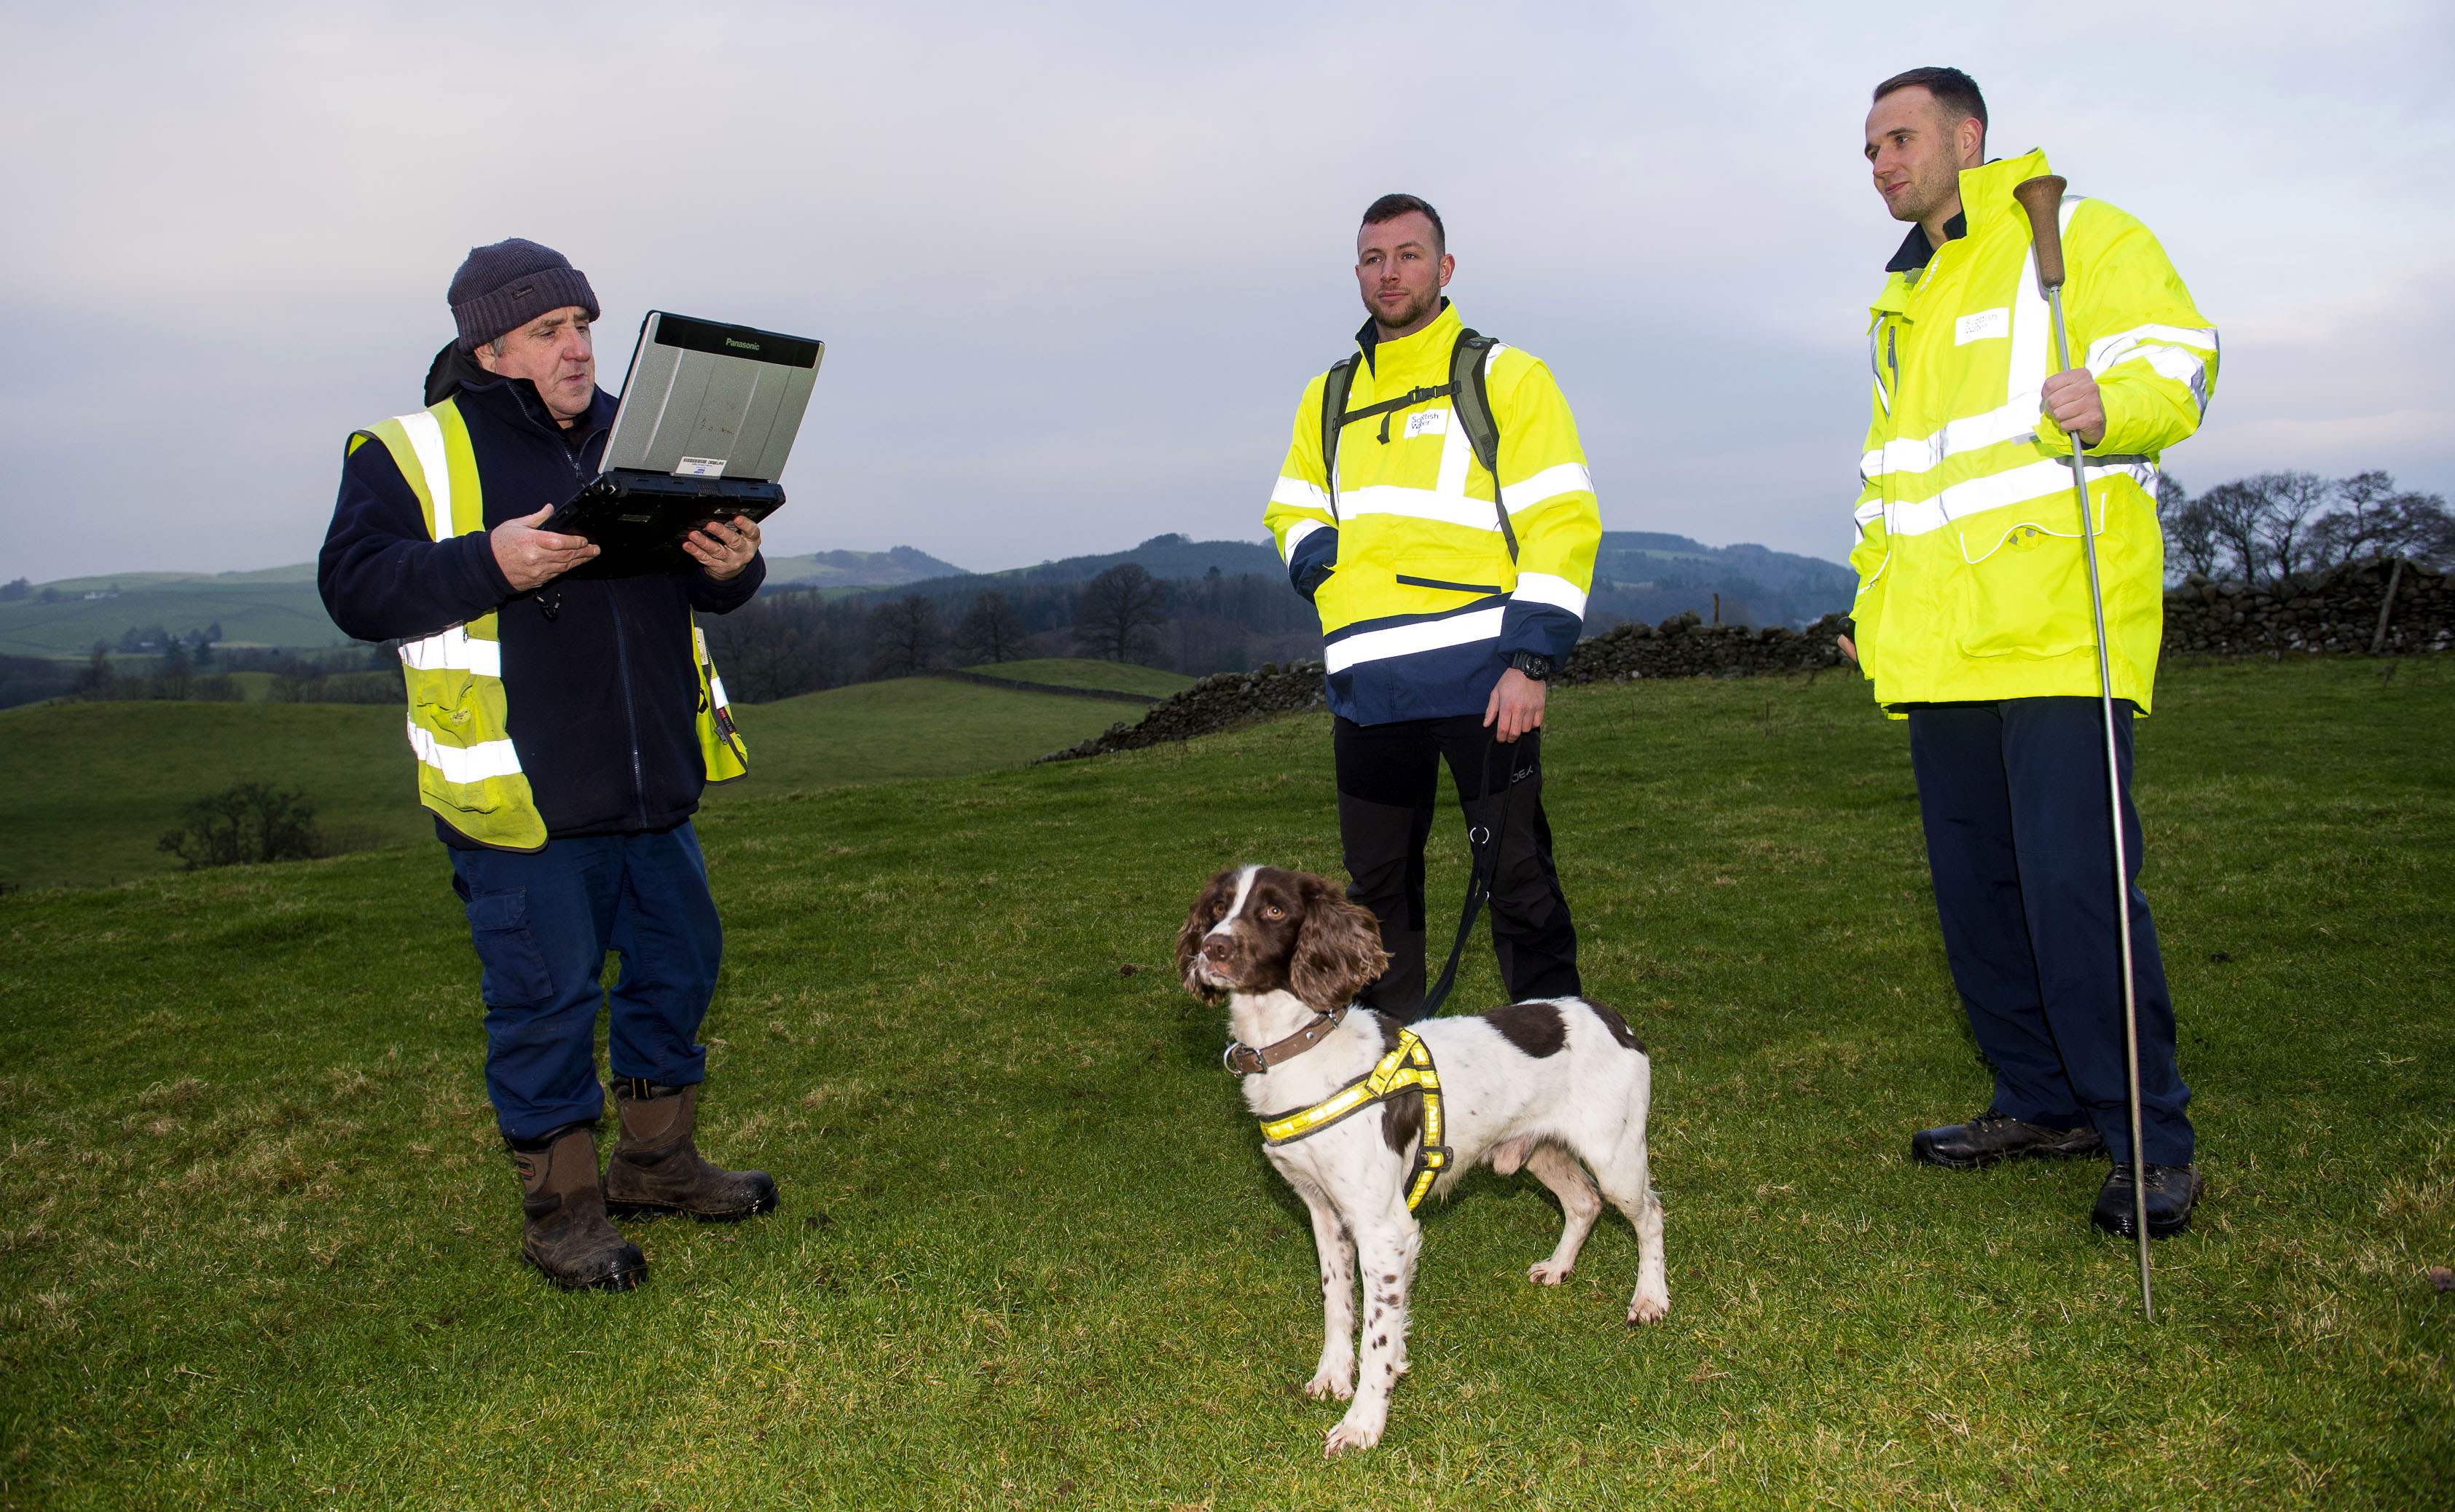 And finally... Sniffer dogs on the scent of leaking water mains